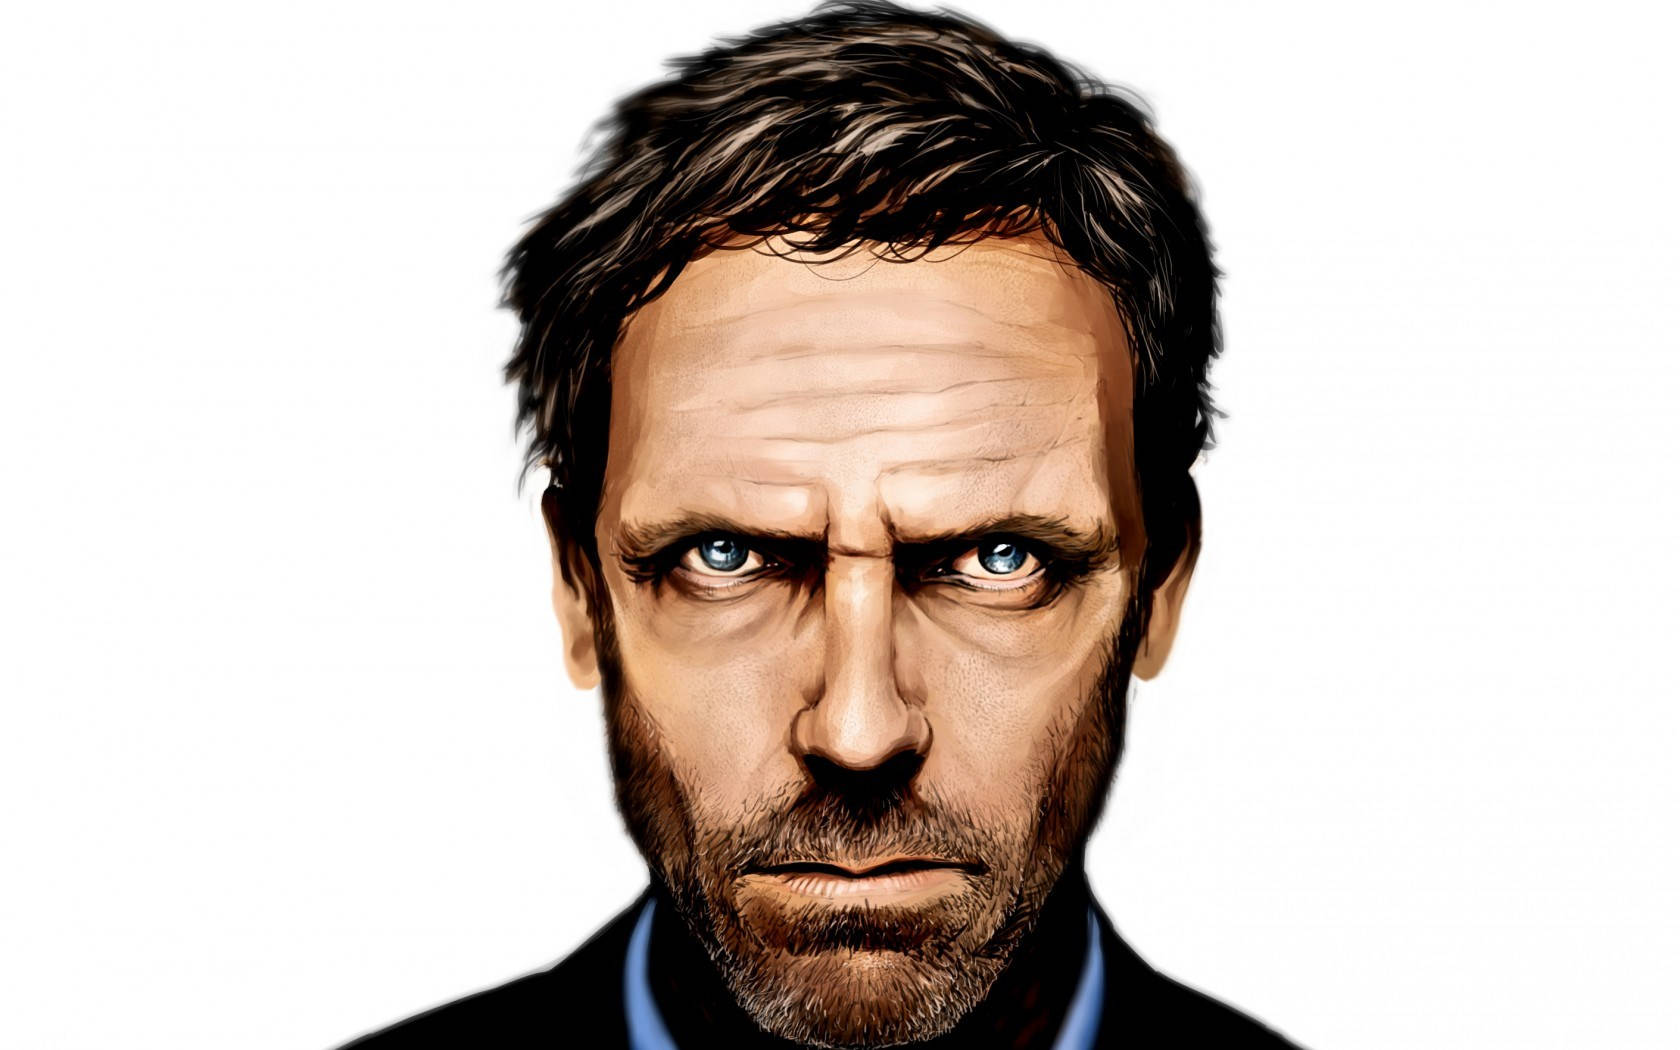 Intriguing Artistic Portrait Of Dr. House